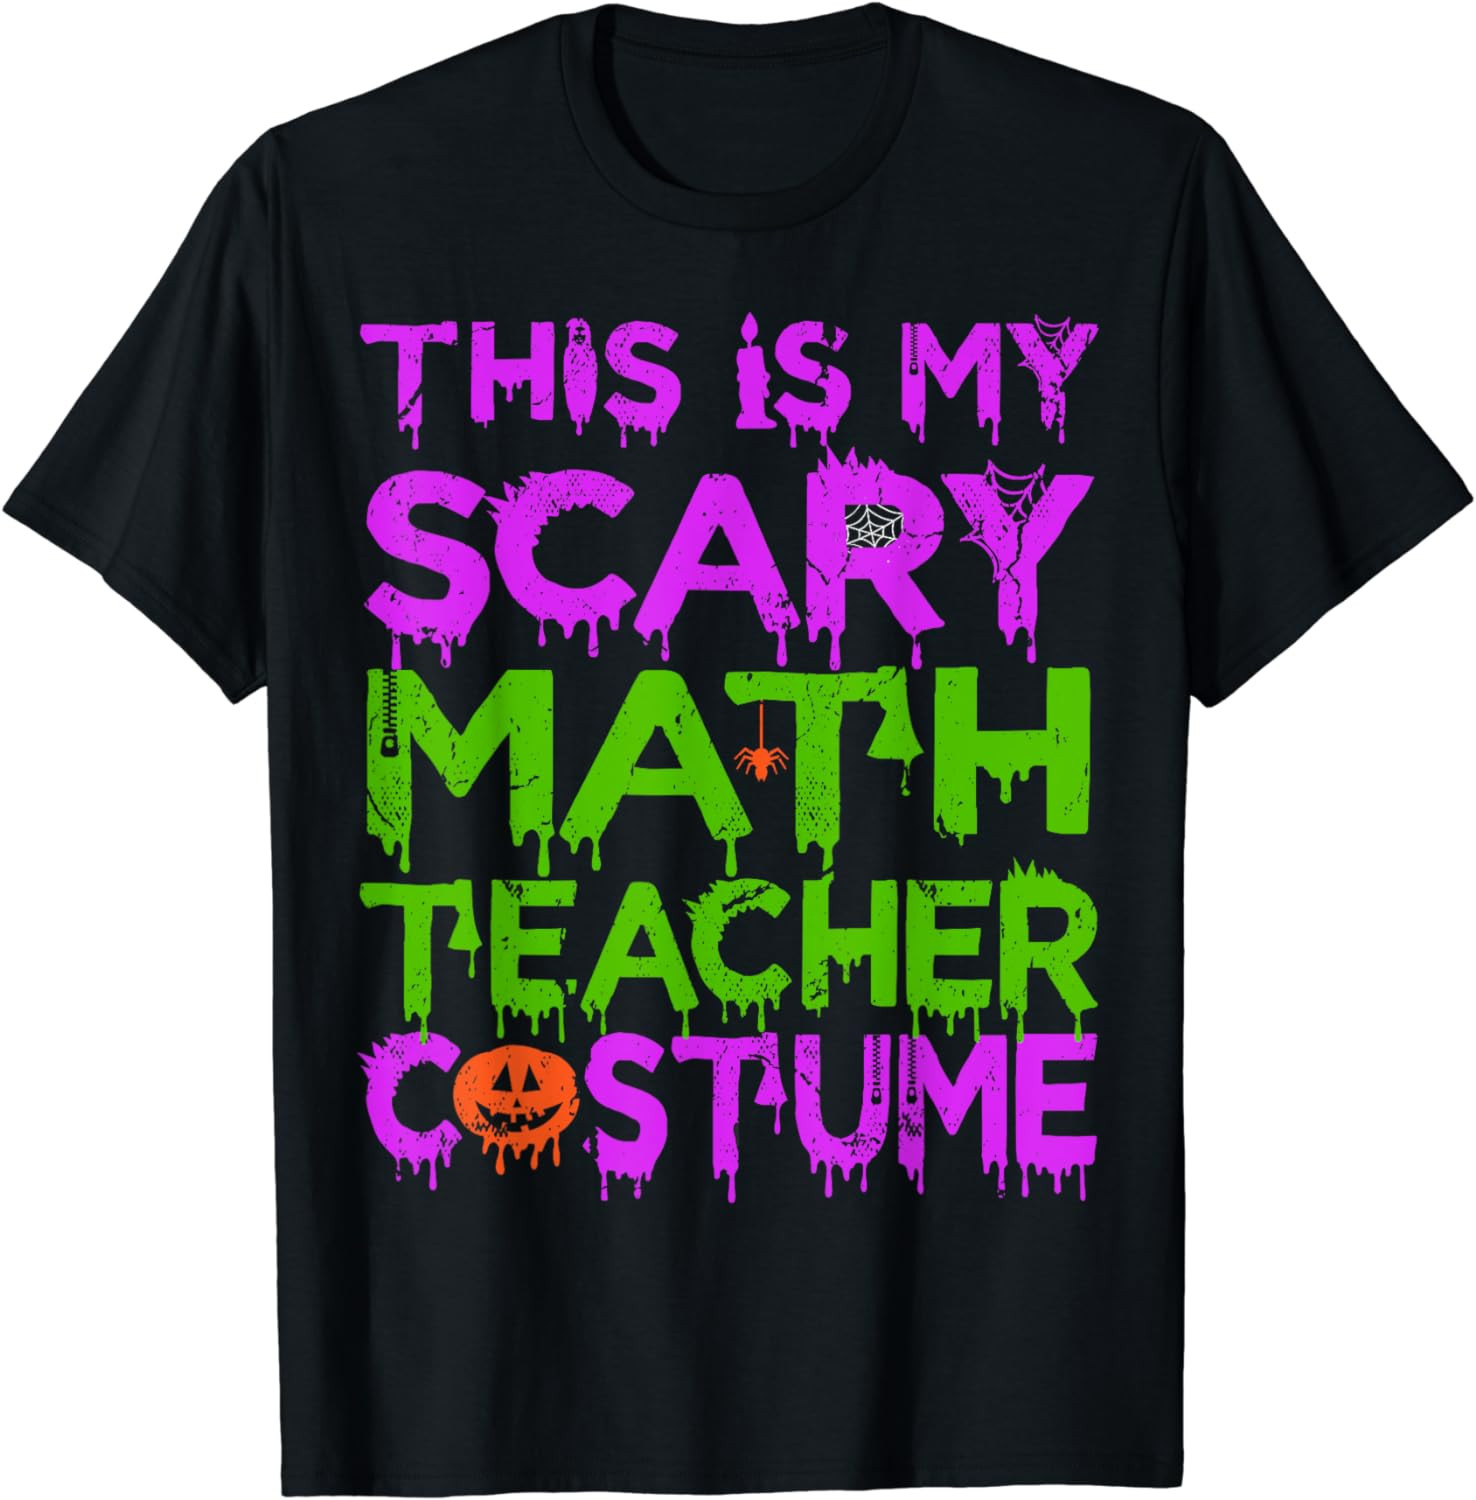 This Is My Scary Math Teacher Costume T-Shirt